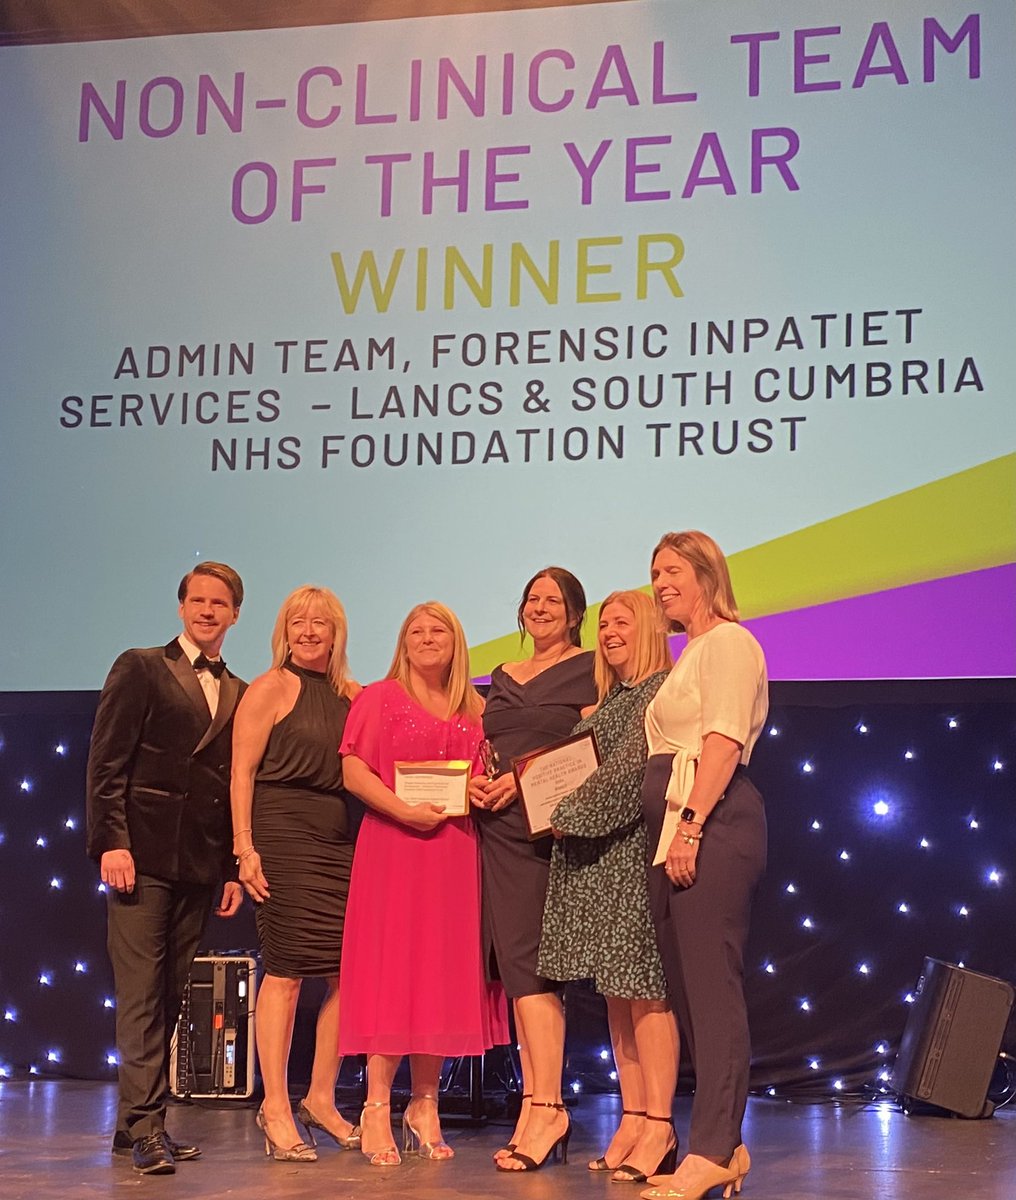 So proud of our @WeareGuildLodge admin team winning non-clinical team of the year. Such a fabulous team supporting health and well-being @fbv1087 @greenall_jo @LauraGeary6 @AnnePye3 #MHAwards24 @WeAreLSCFT